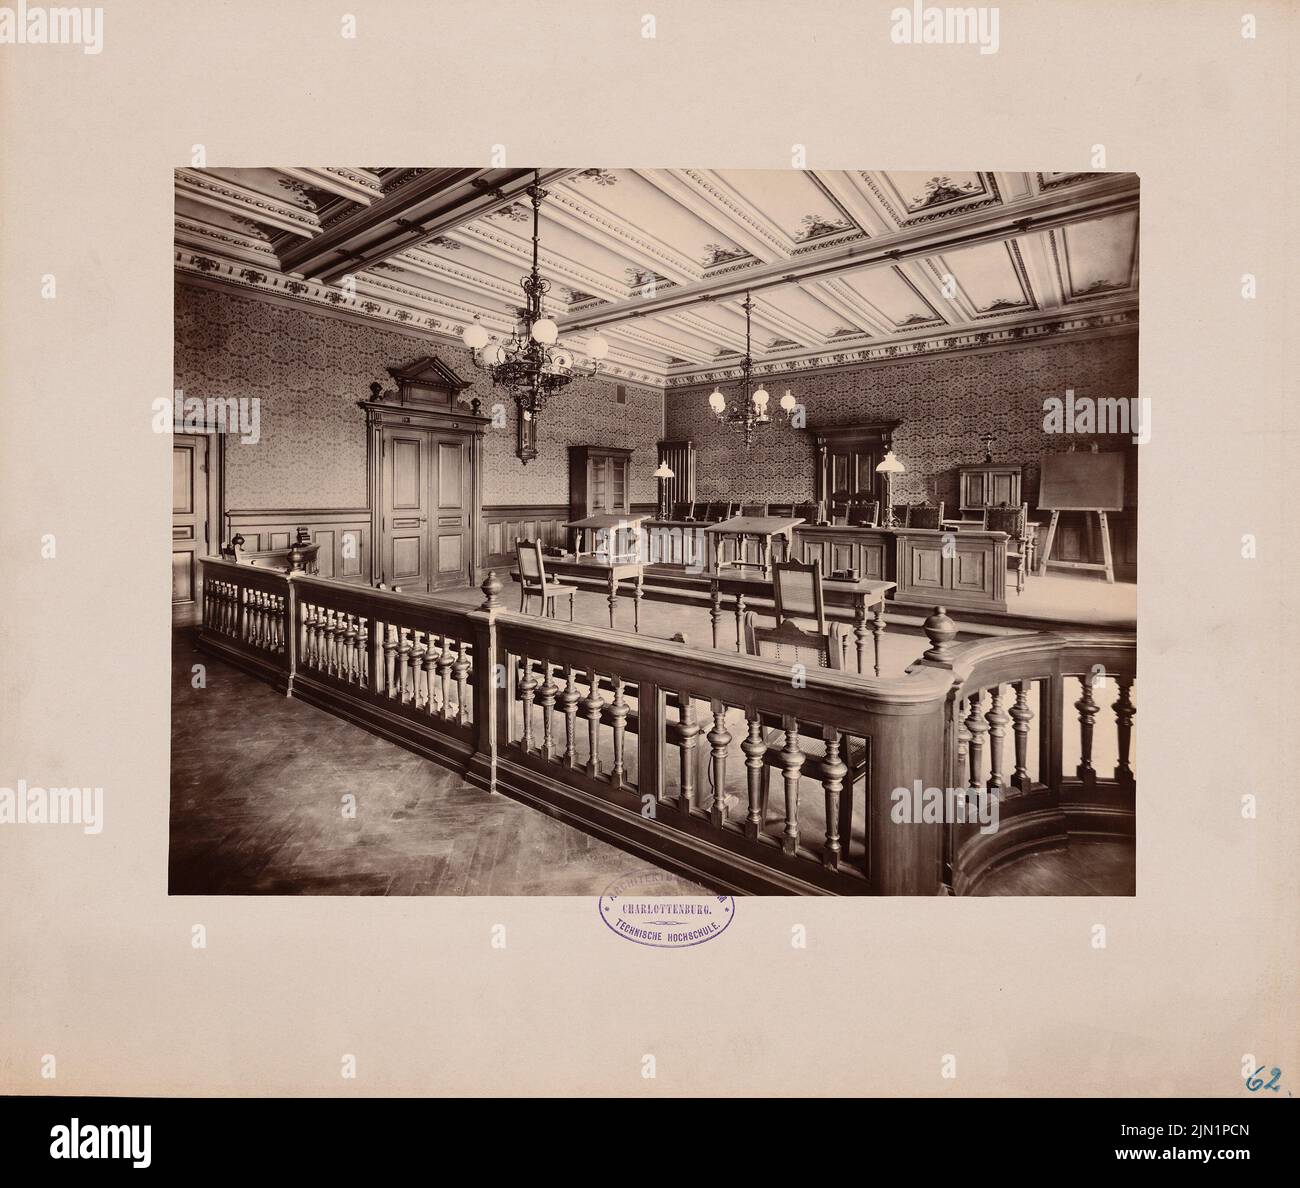 N.N., Oberlandes and District Court, Hamm (1890-1894): Interior view session room. Photo on cardboard, 36.6 x 43.3 cm (including scan edges) N.N. : Oberlandes- und Amtsgericht, Hamm Stock Photo